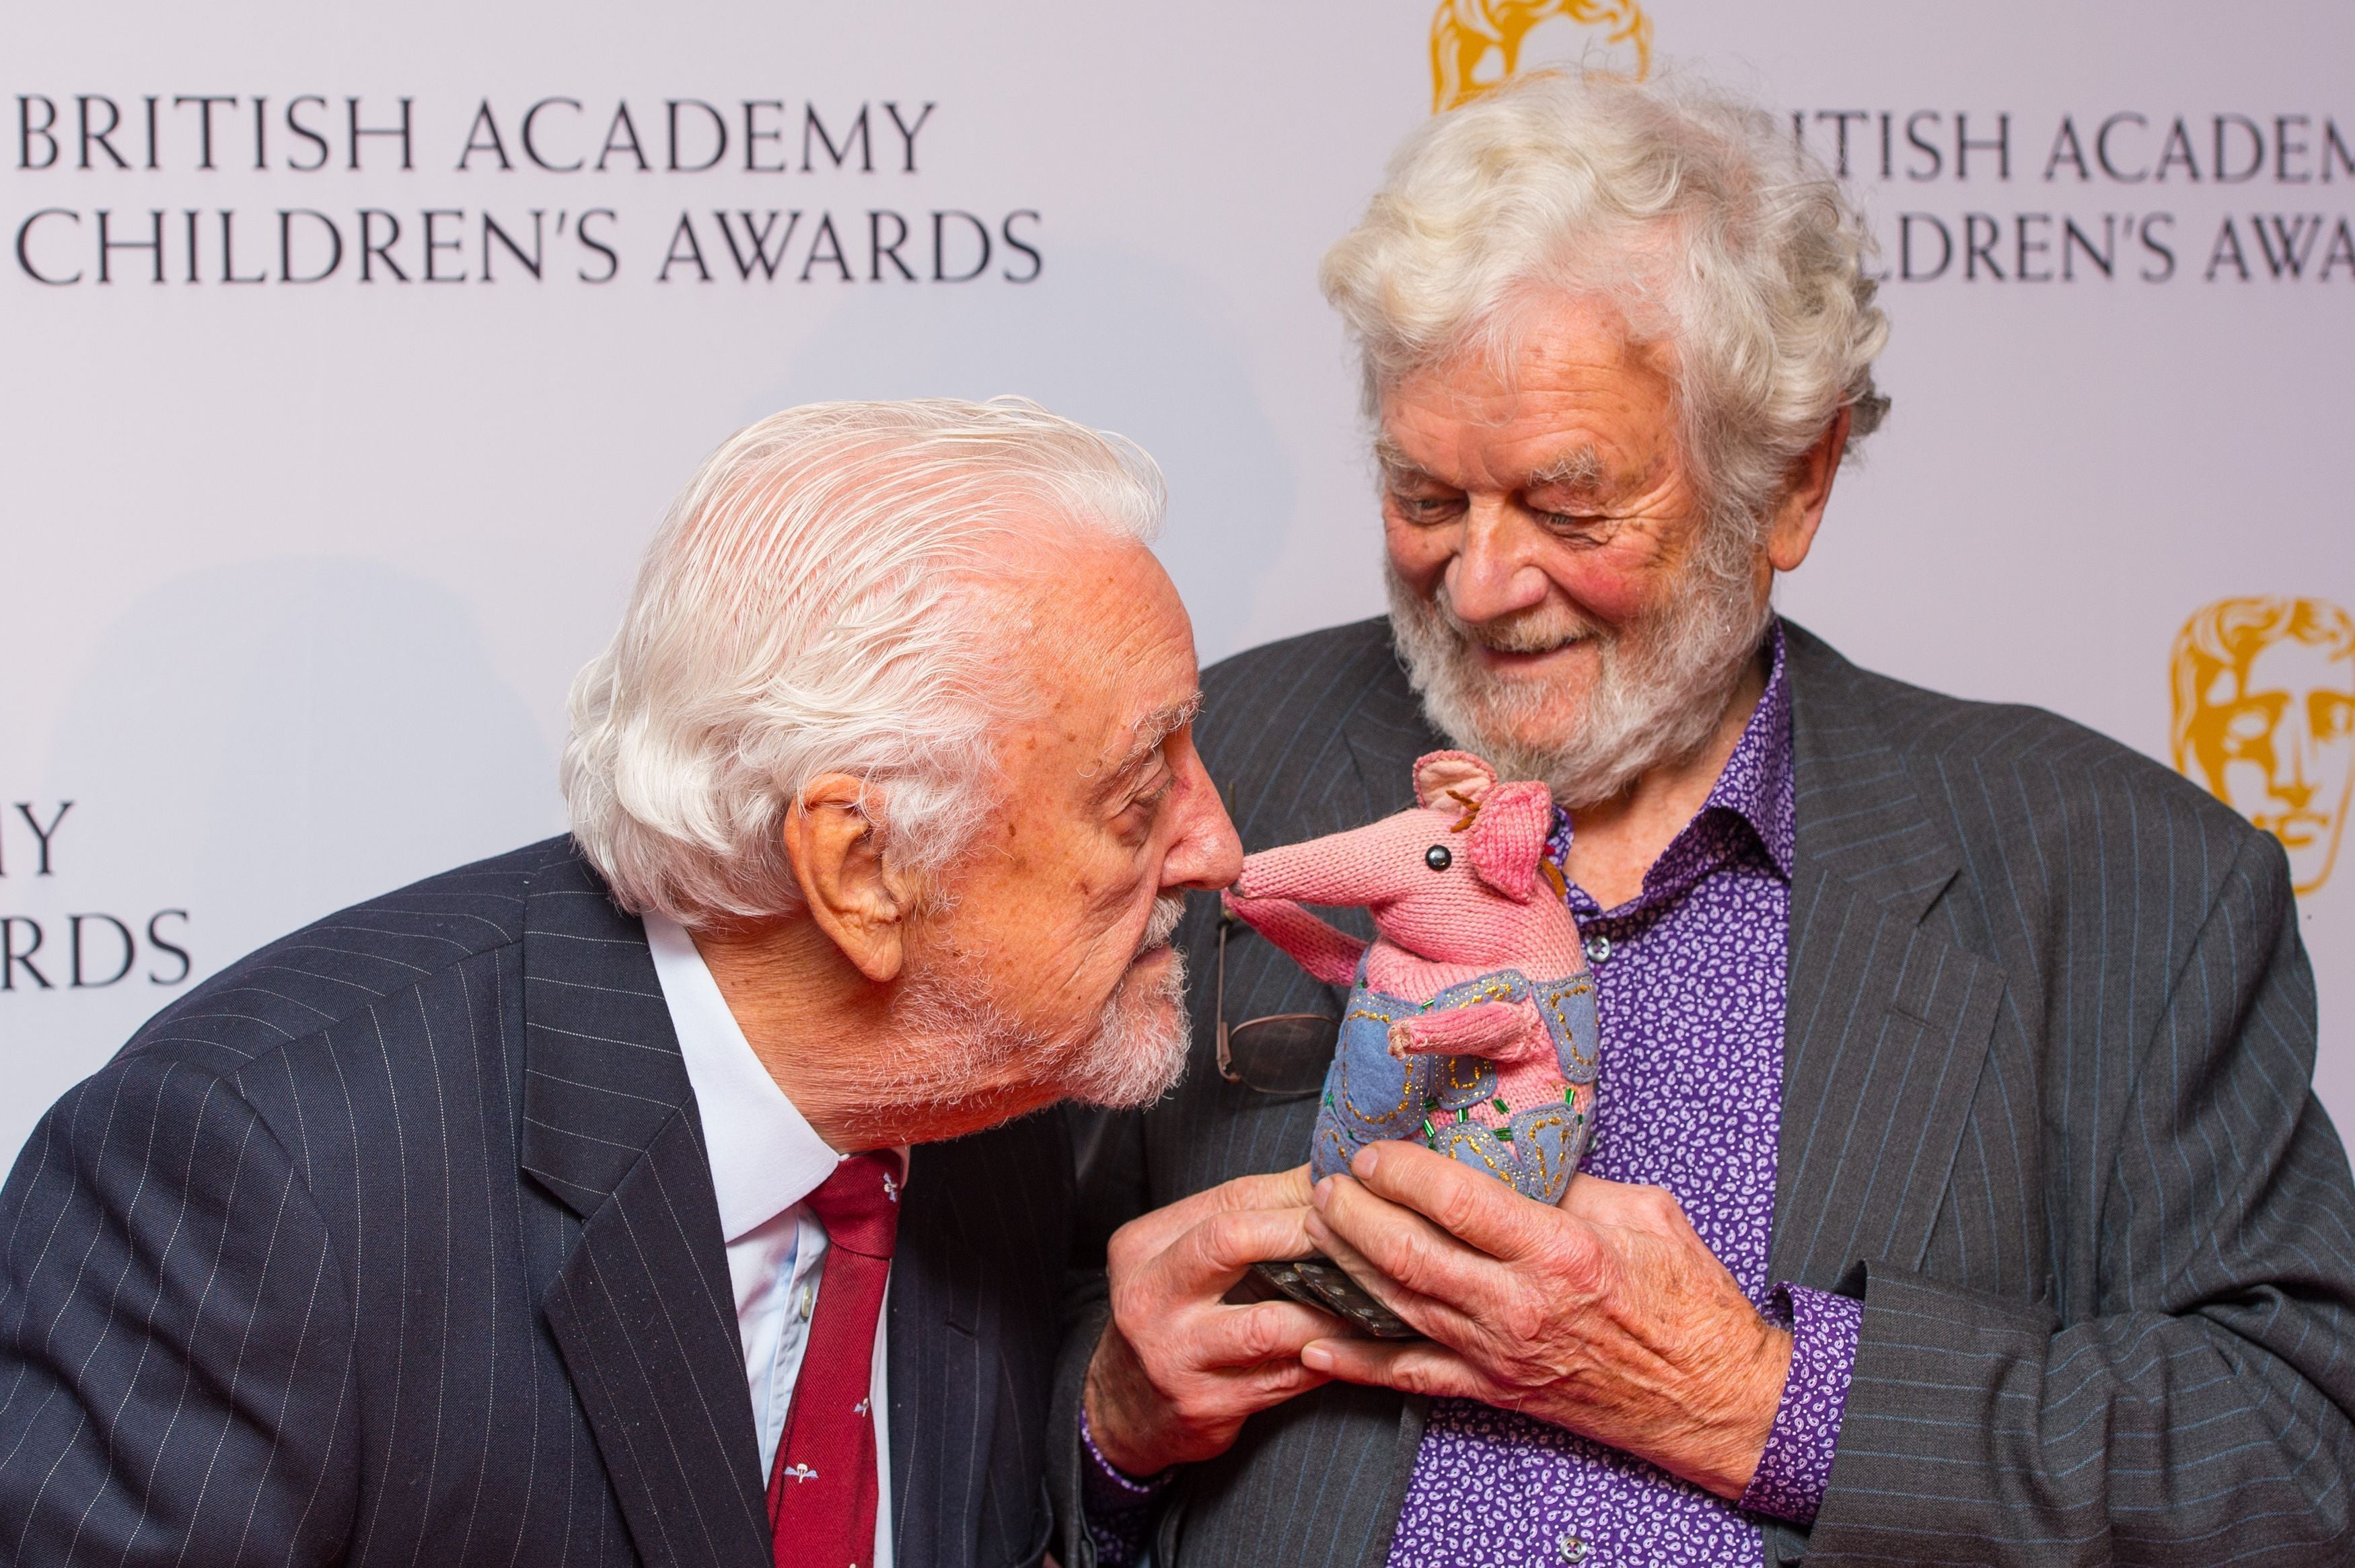 Cribbins was a stalwart of children’s television throughout his career, a friendly face and voice for generations of youngsters whether he was narrating The Wombles or telling stories in Old Jack’s Boat. Here he is with Clangers creator Peter Firmin, plus a friend (Dominic Lipinski/PA)